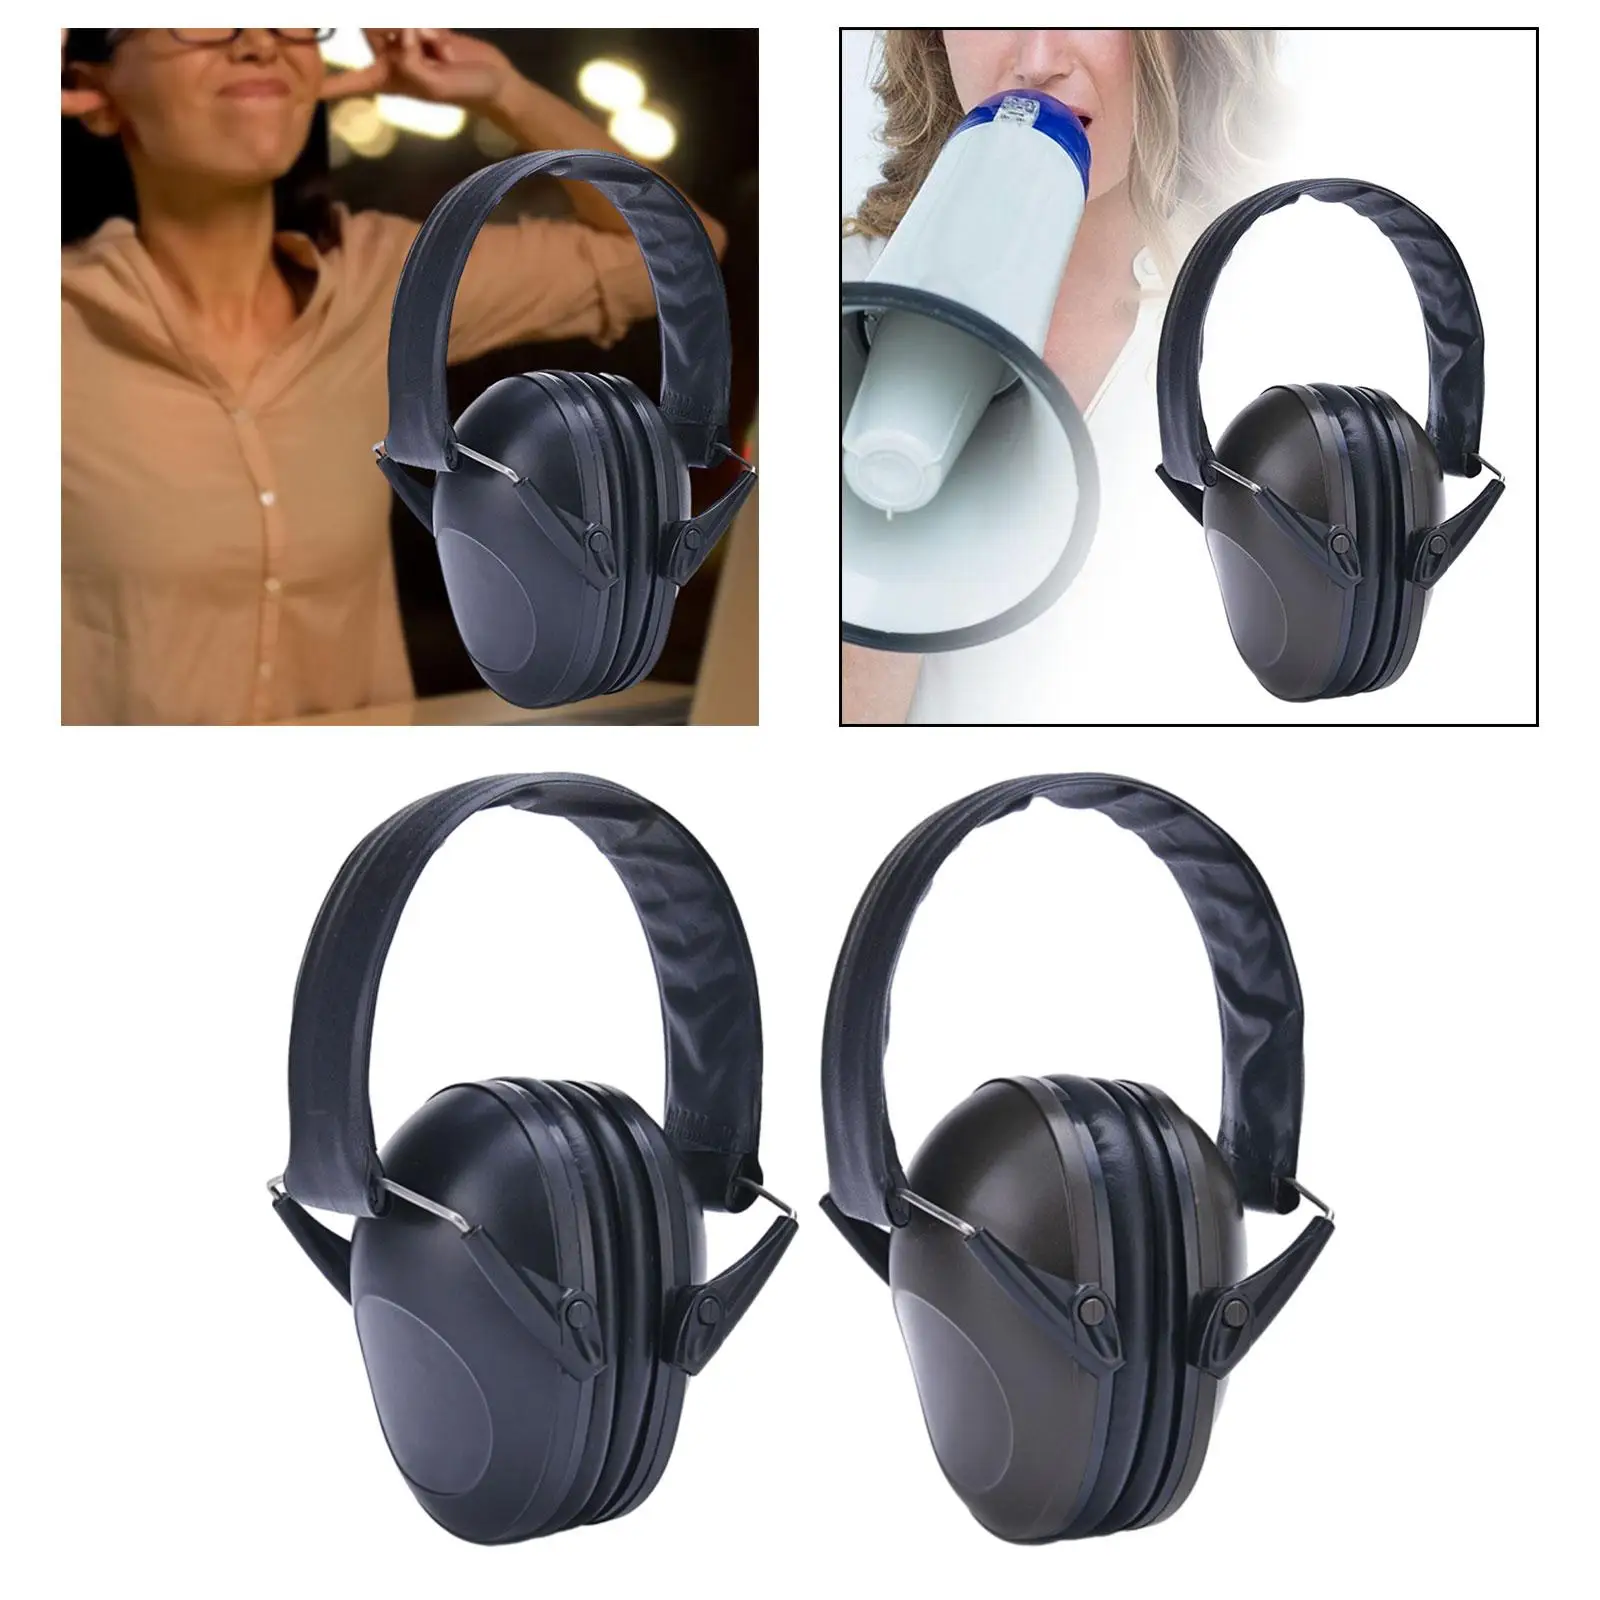 Hearing Protection Noise Cancelling Compact Ear Defenders Ear Protector for Concerts Wood Work Construction Lawn Mowing Sleeping